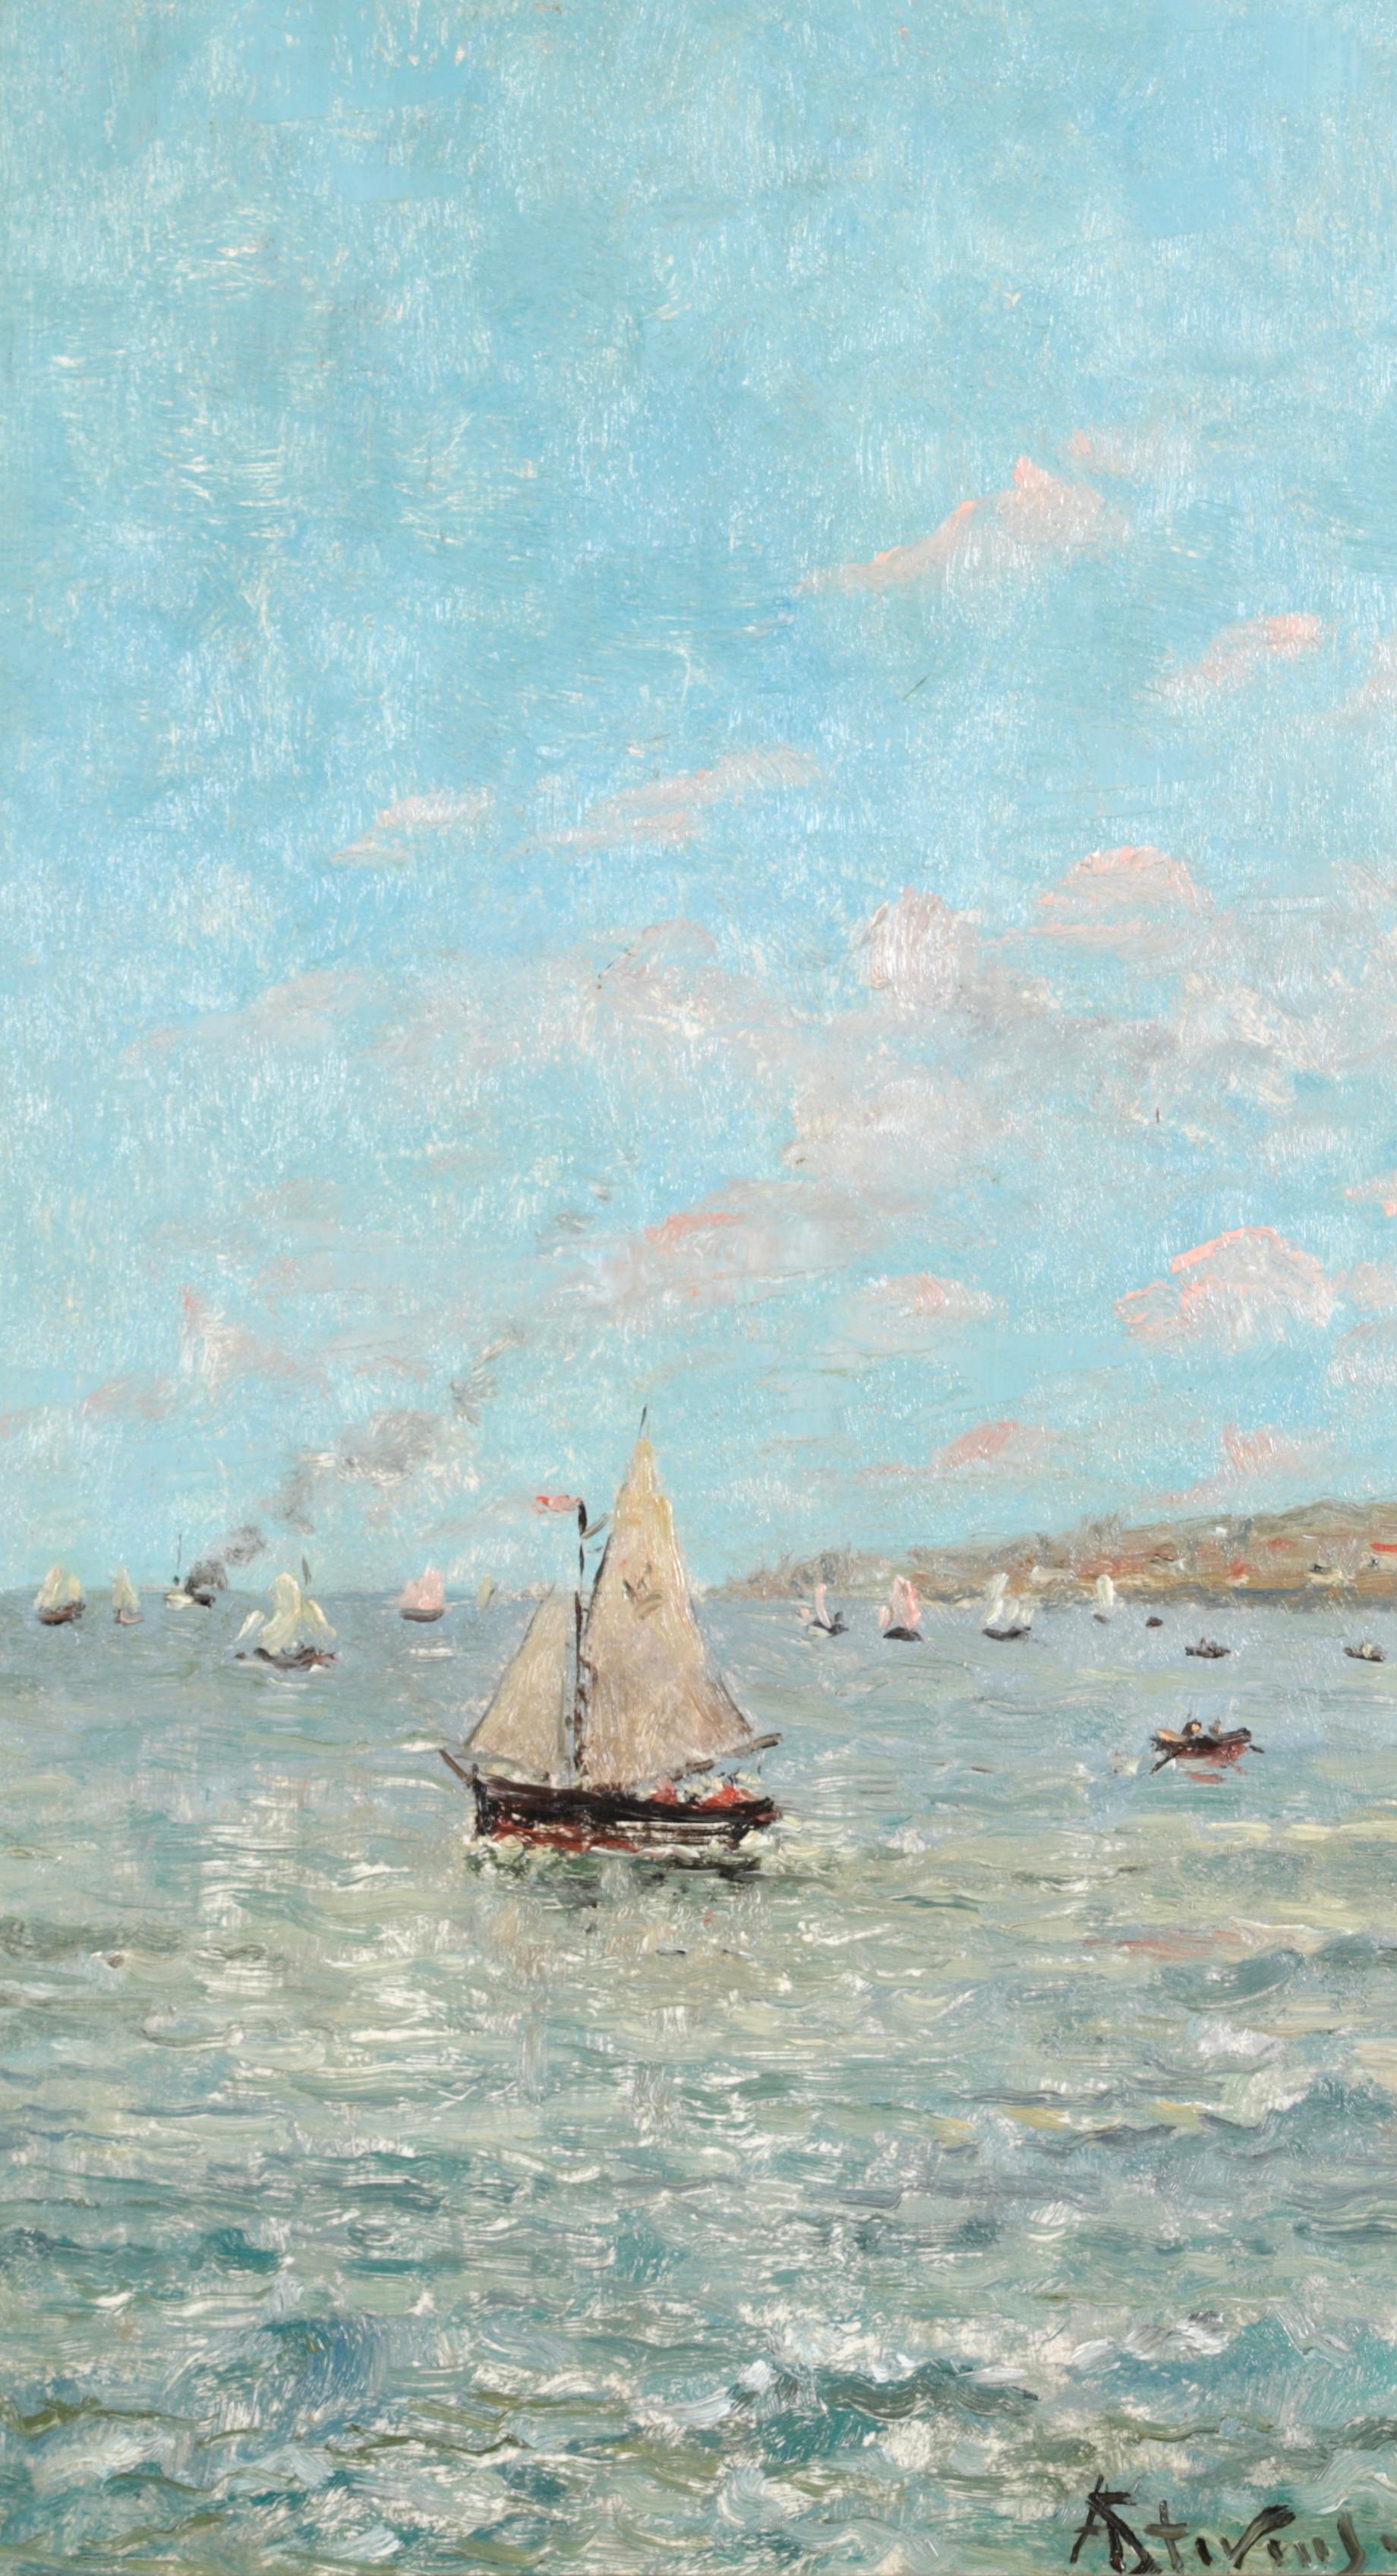 Signed seascape oil on panel by Belgian Realist painter Alfred Emile Leopold Stevens. The work depicts sail boats in the blue-green waters off the coast of Sainte-Adresse in Normandy, Northern France with bright blue skies